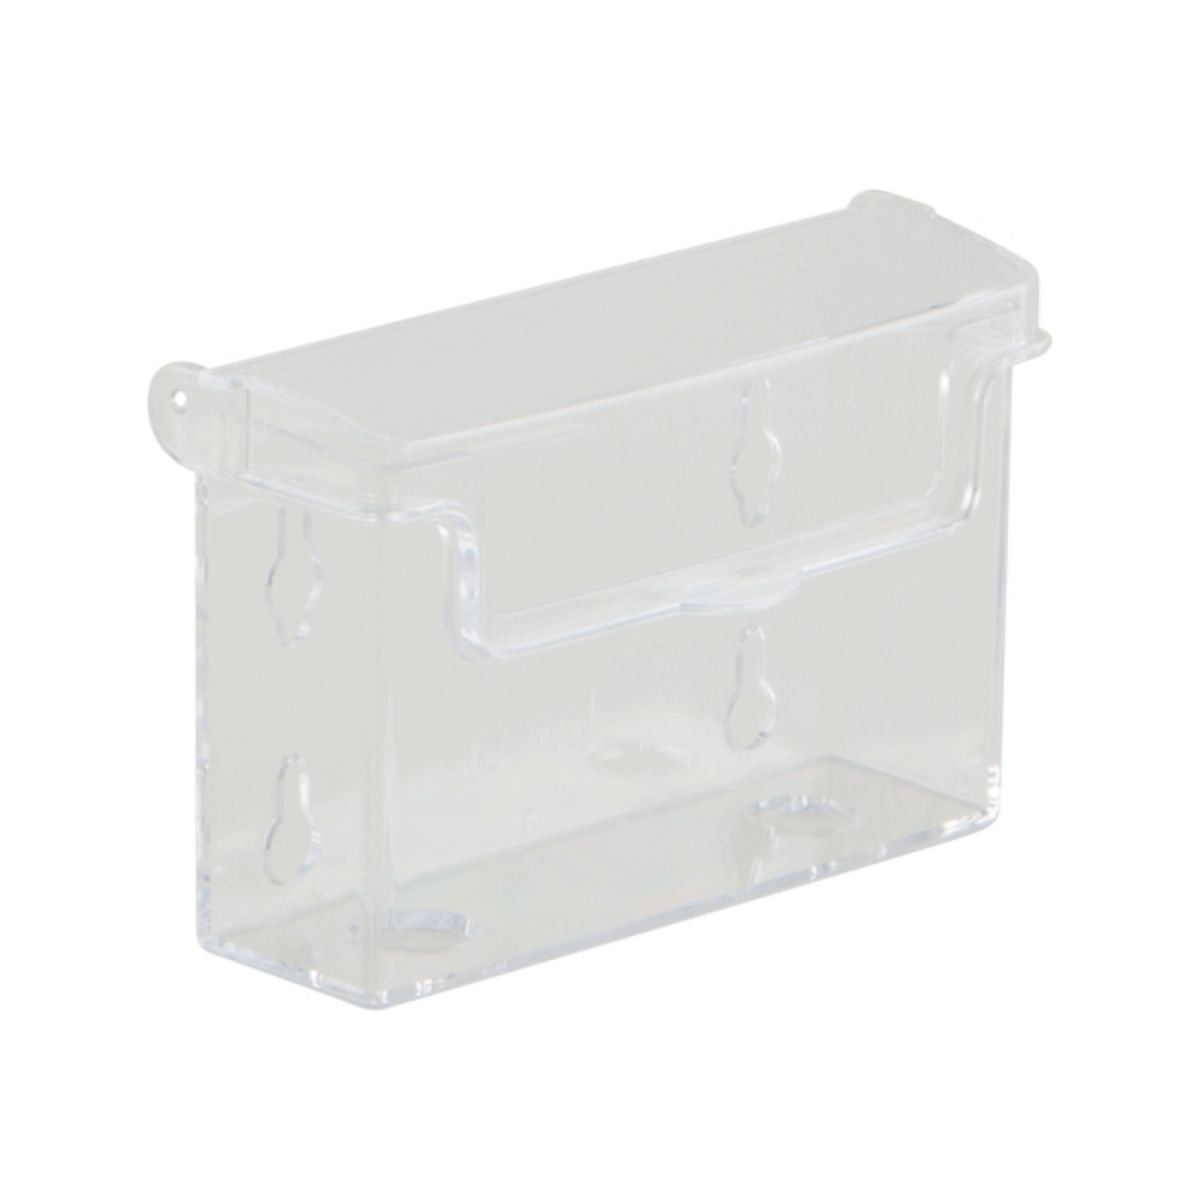 Plastic outdoor business card holders.png